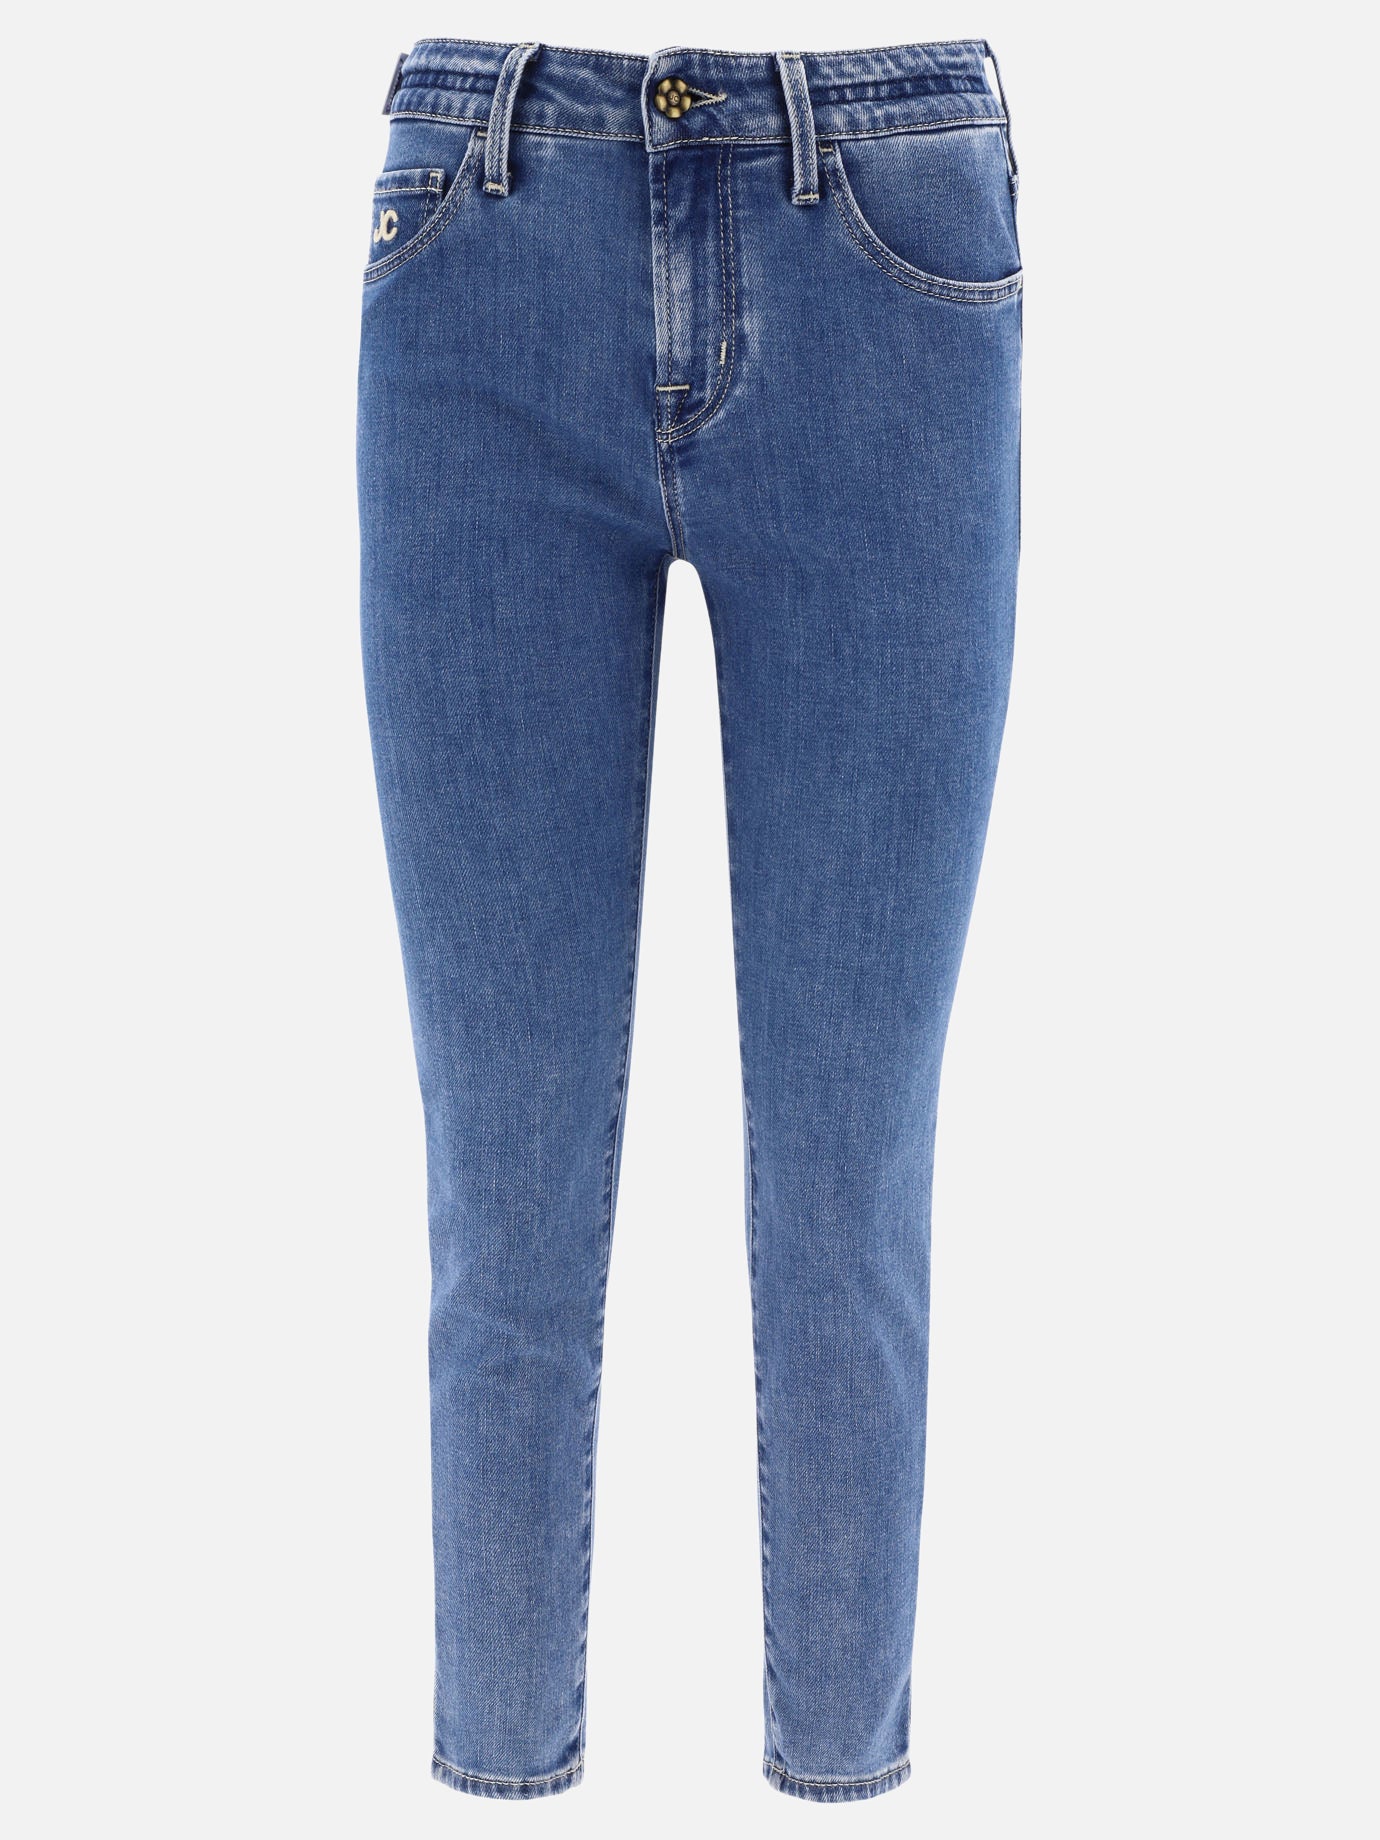 "Kimberly Crop" jeans